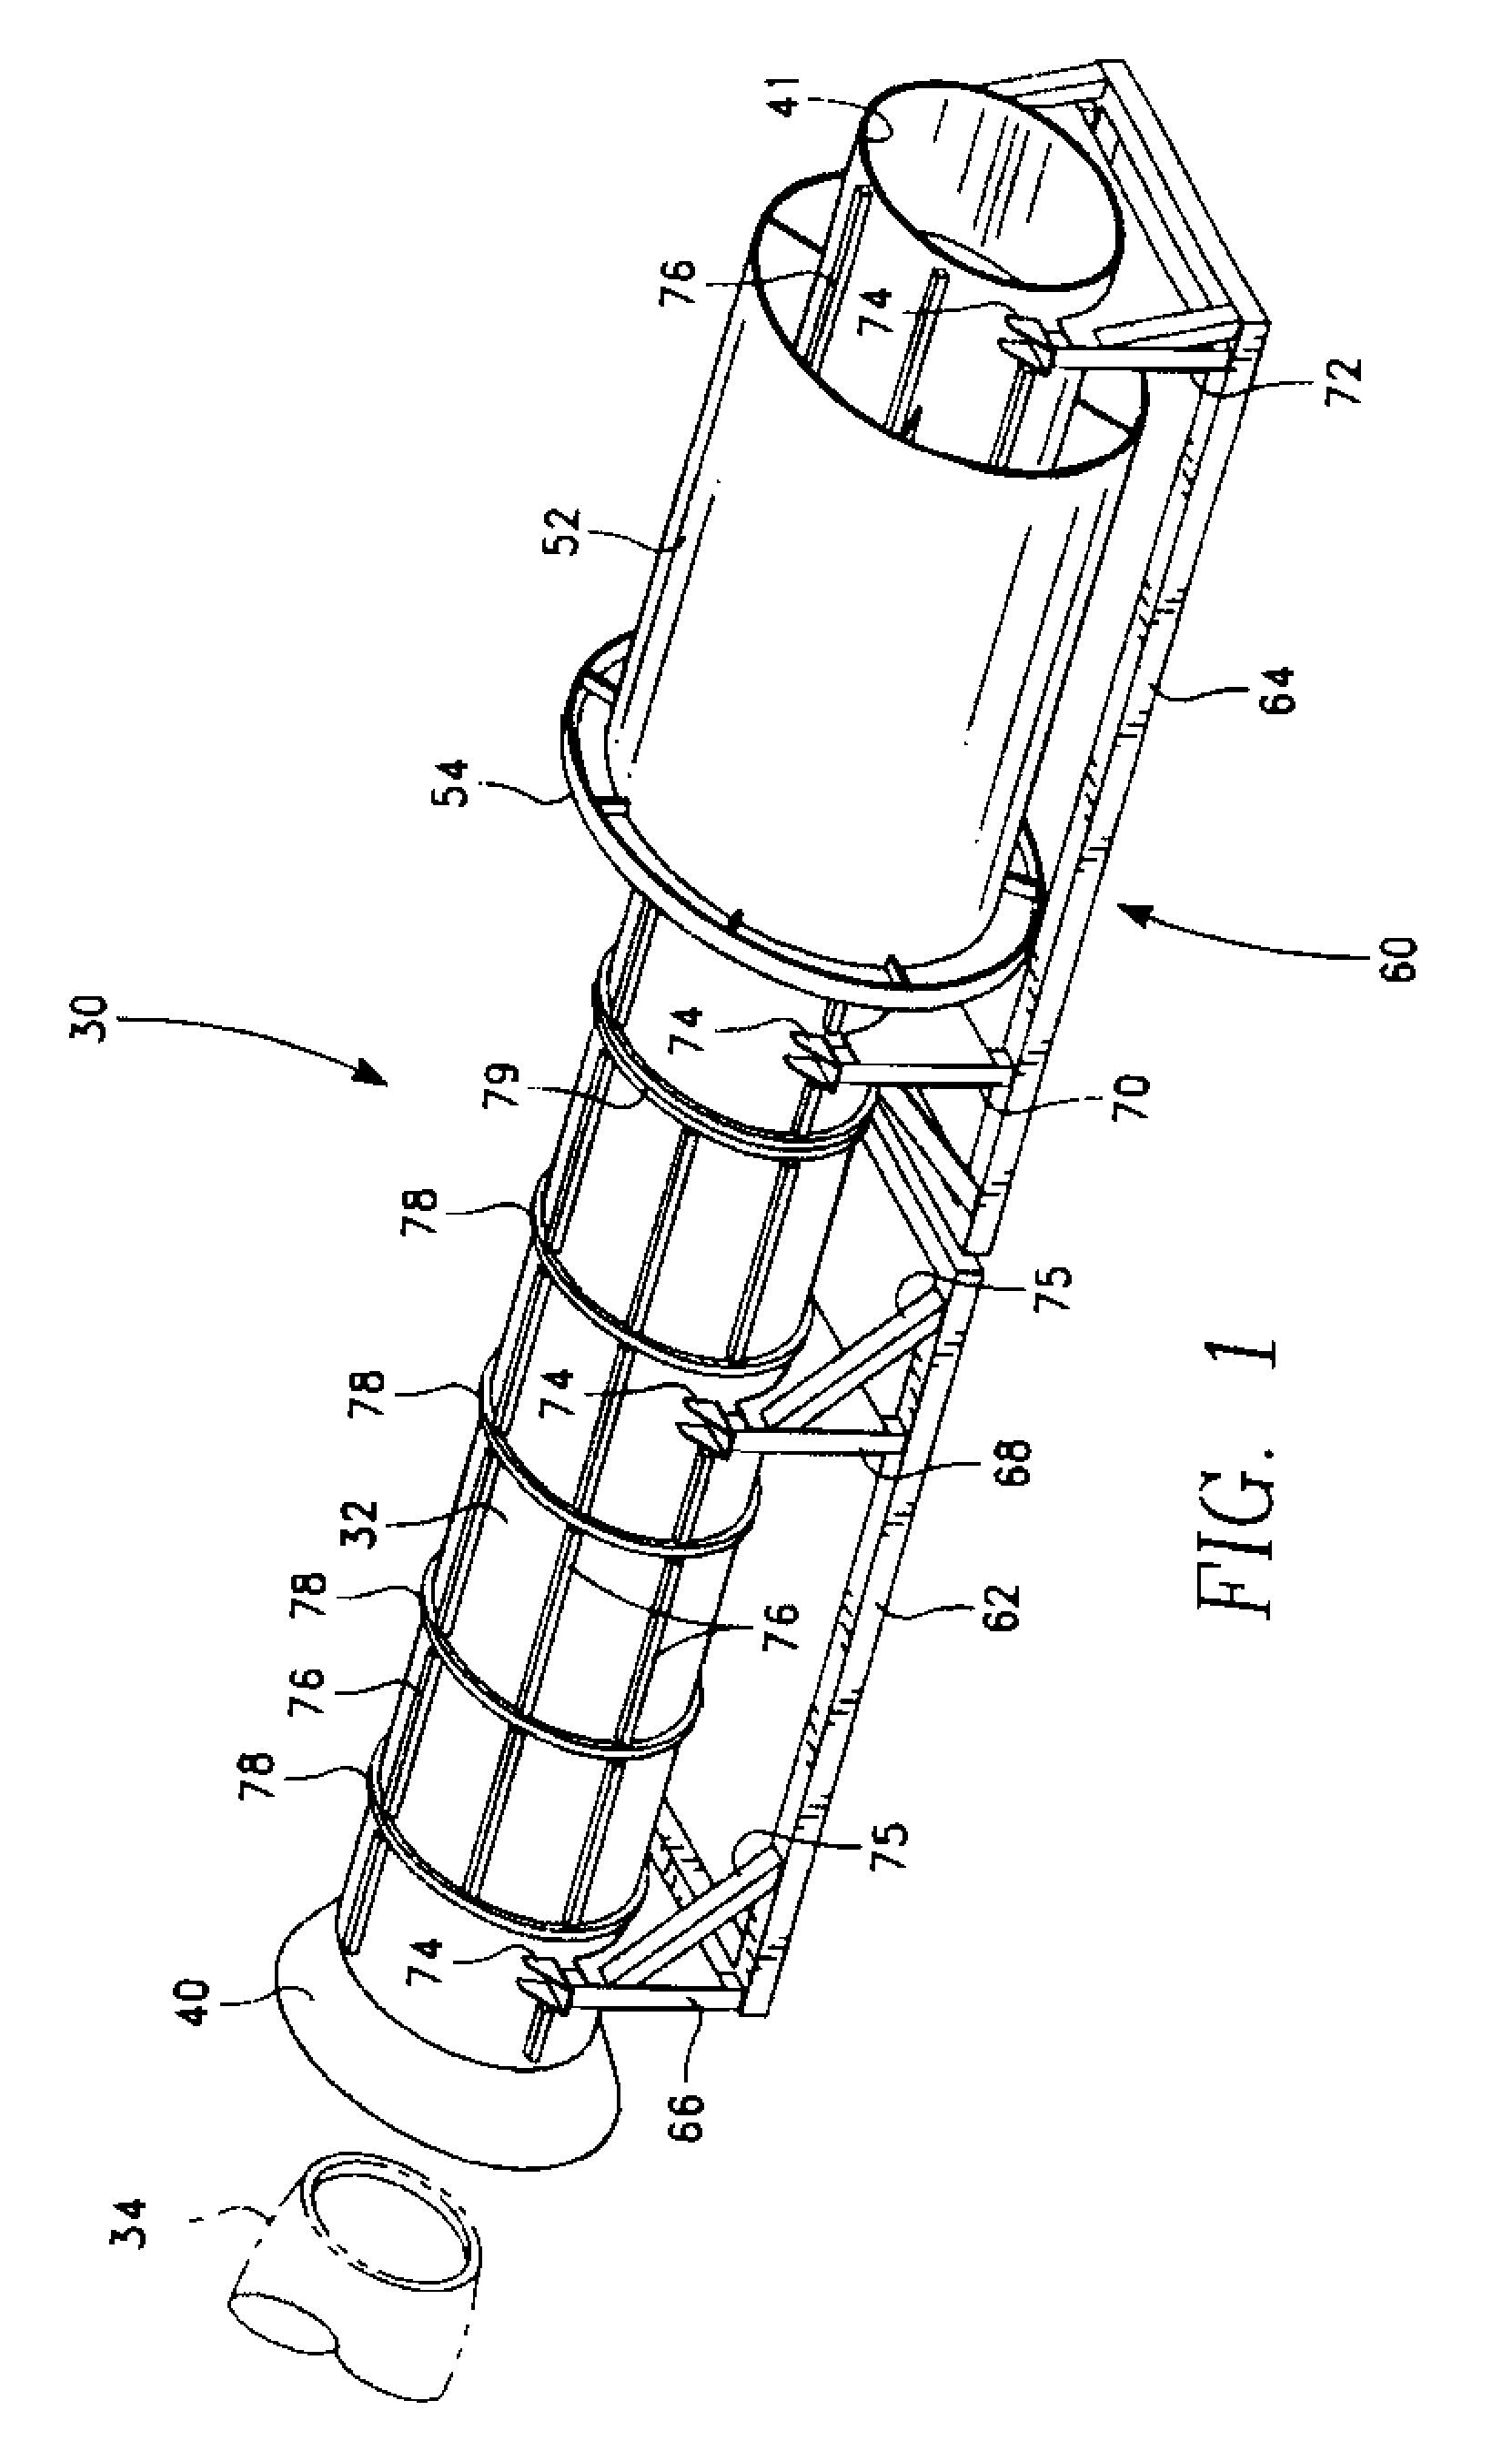 Noise attenuation device for reducing noise attenuation in a jet engine test cell